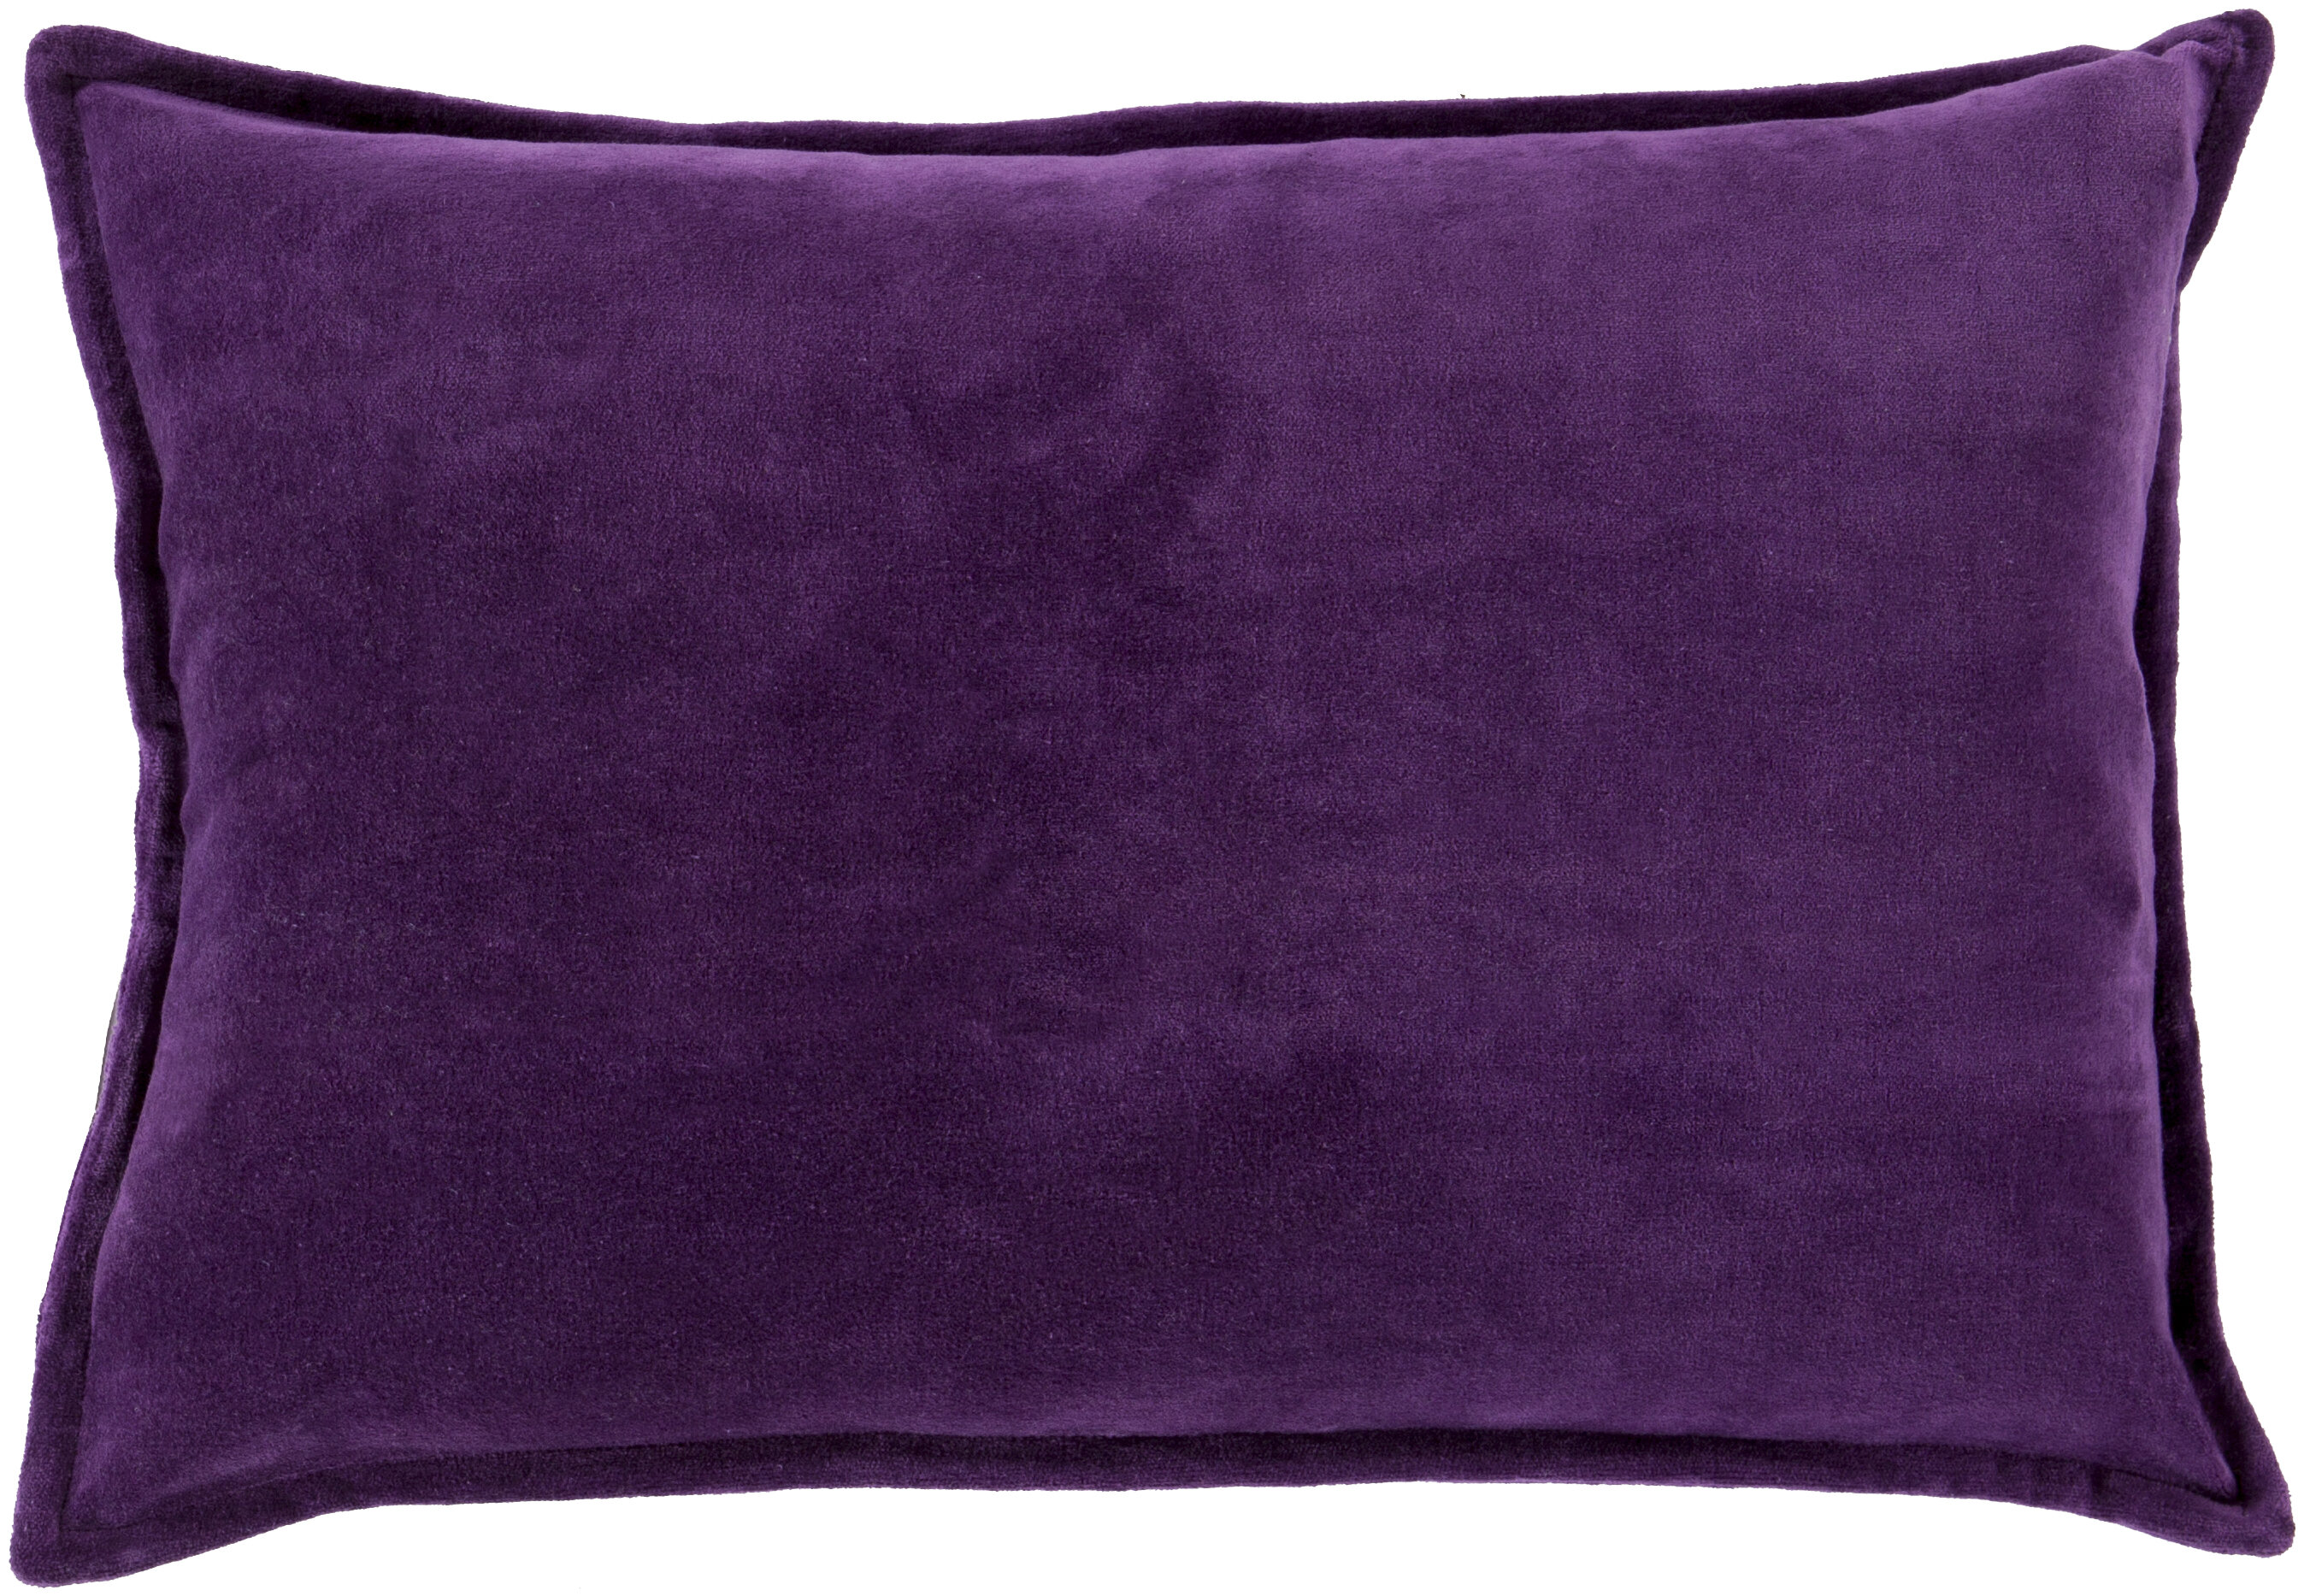 plum colored pillows